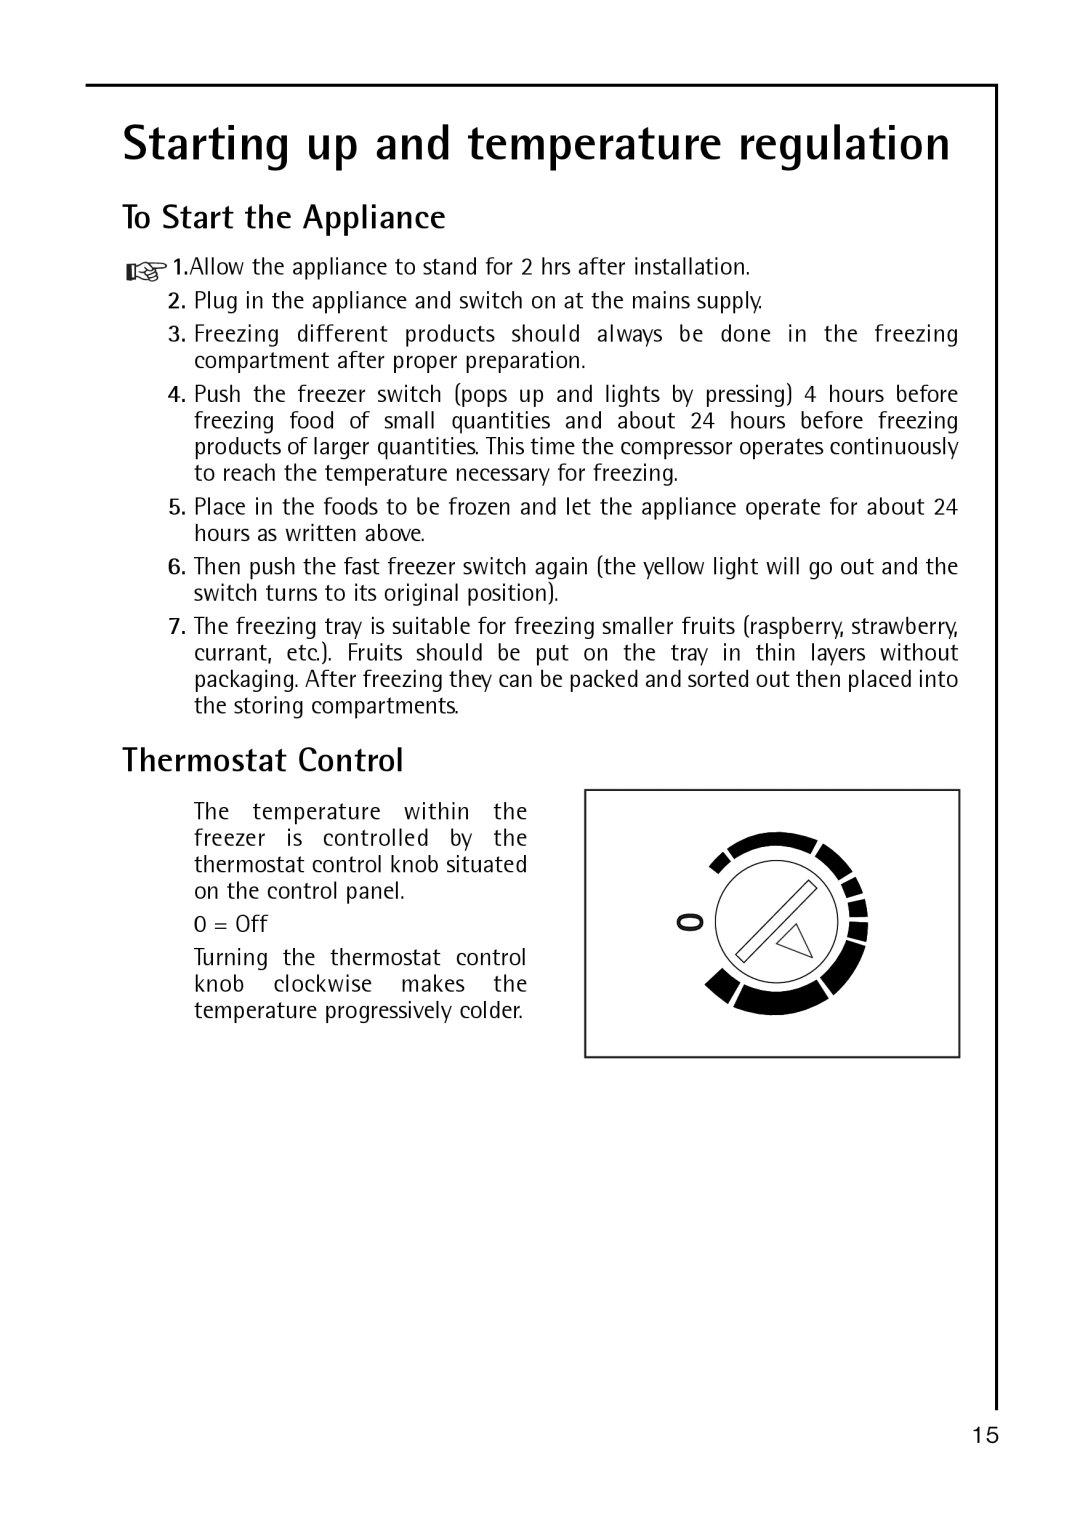 Electrolux A 40100 GS Starting up and temperature regulation, To Start the Appliance, Thermostat Control 